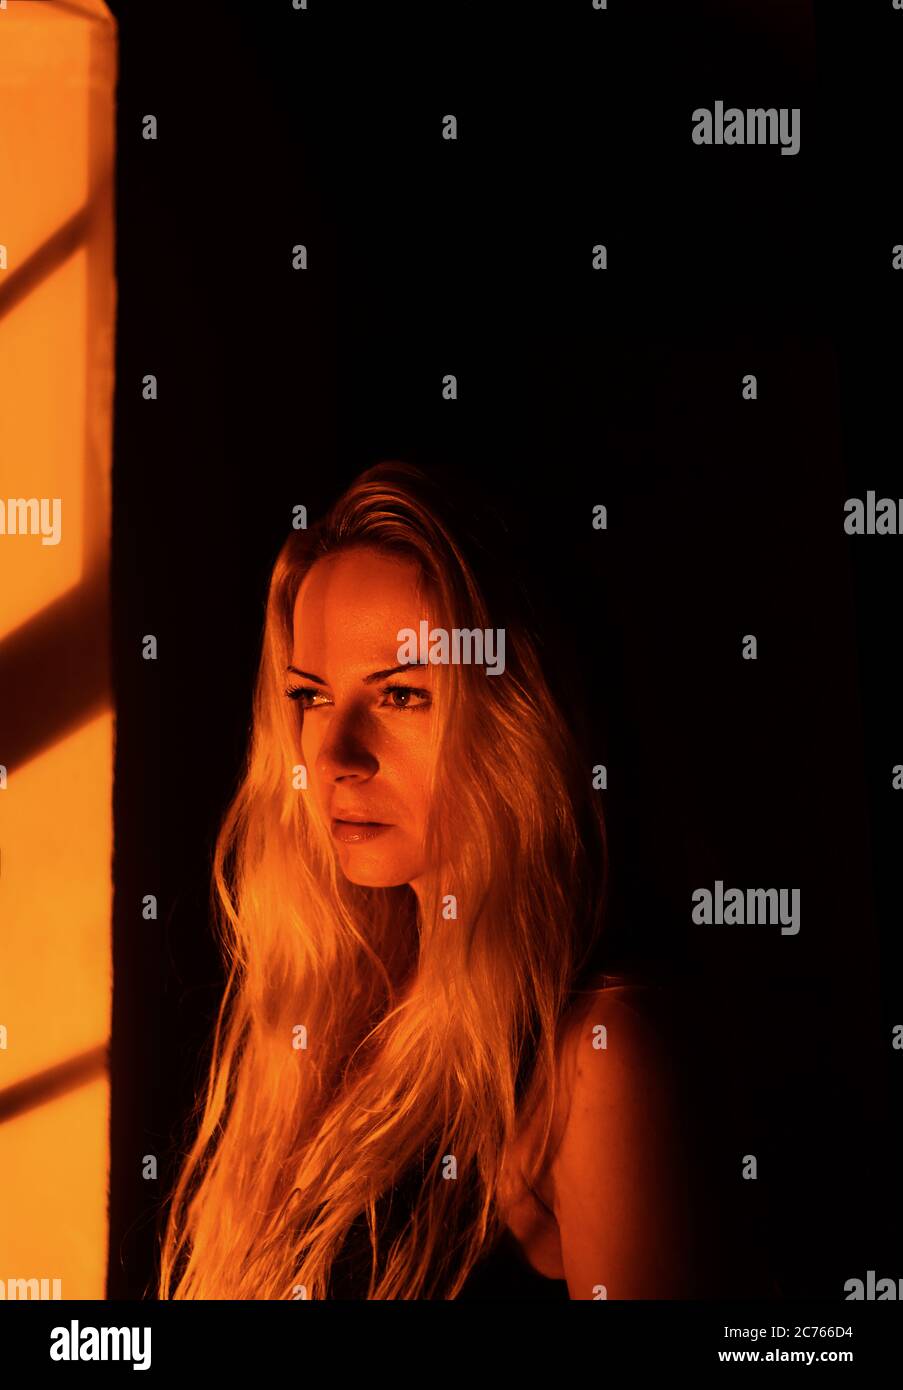 woman with long blond hair standing by a window at night Stock Photo